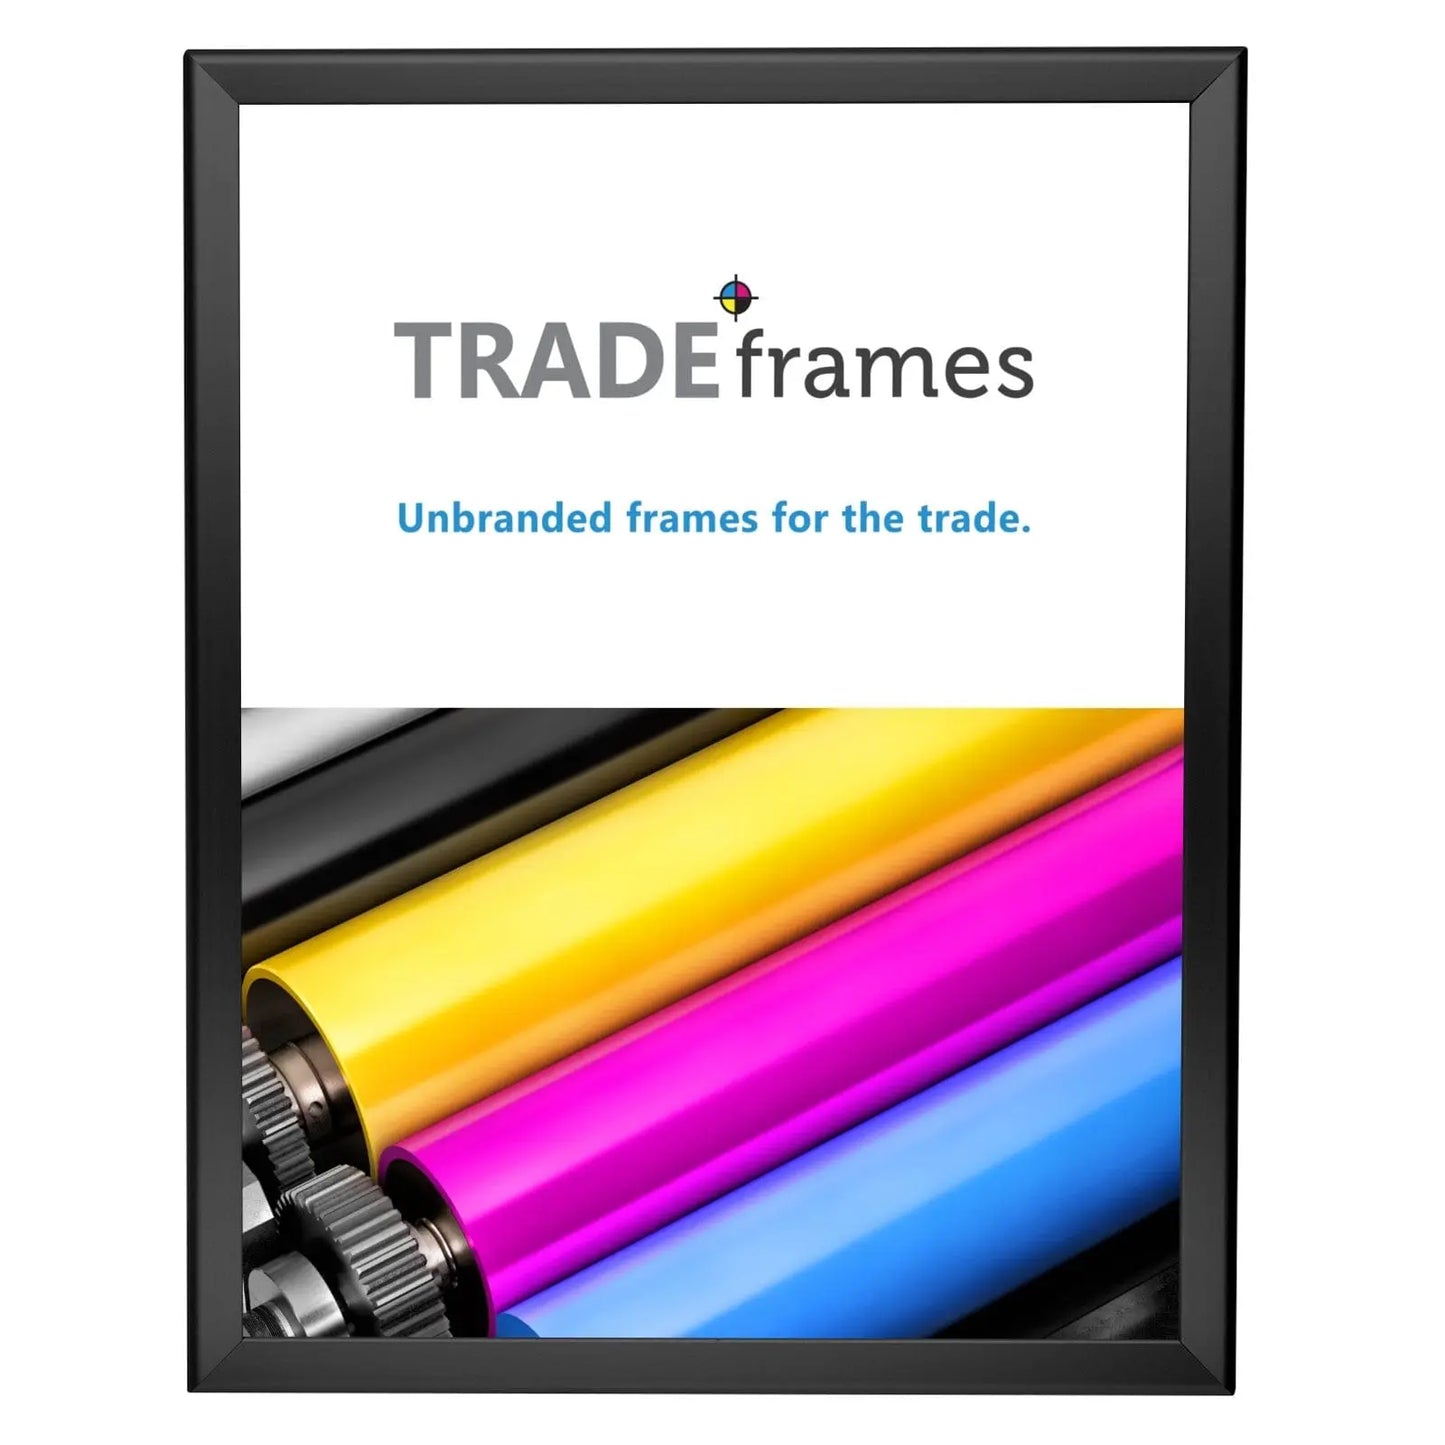 22x28 Inches Black Snap Frame - 1.25" Profile - Snap Frames Direct